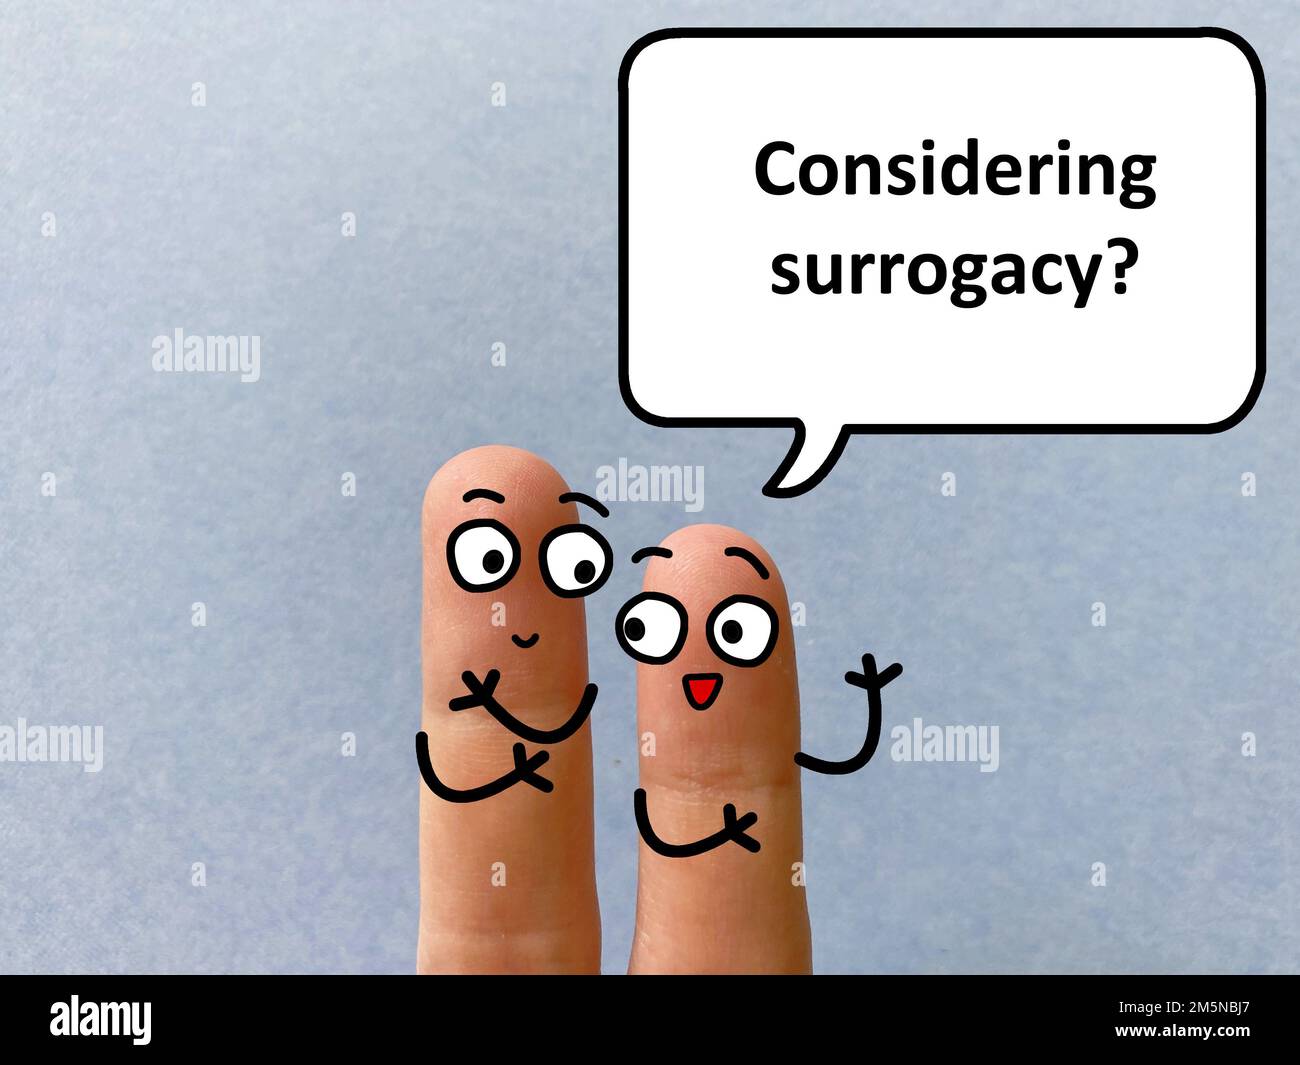 Two fingers are decorated as two person. One of them is asking another if he is considering surrogacy. Stock Photo